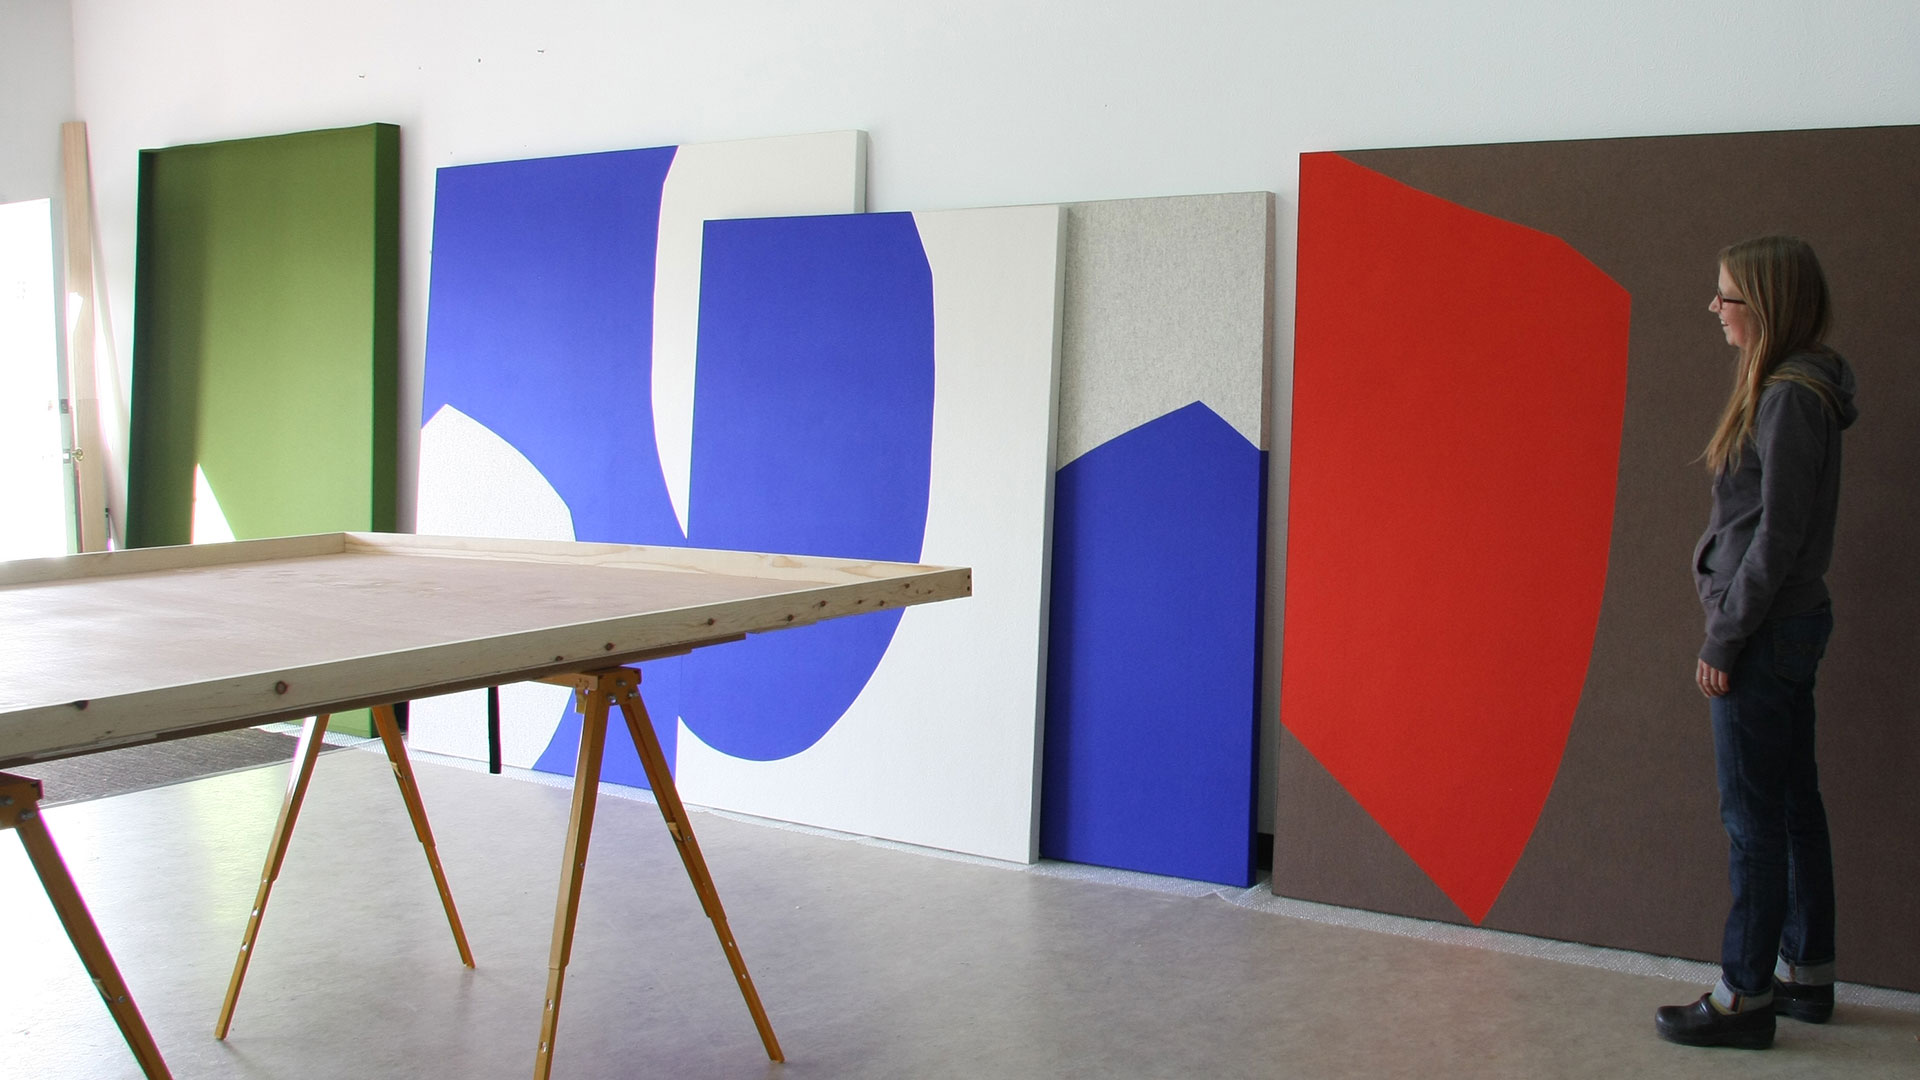 A woman with long hair looks at a grouping of large felt canvas with organic shapes in blue, red and green